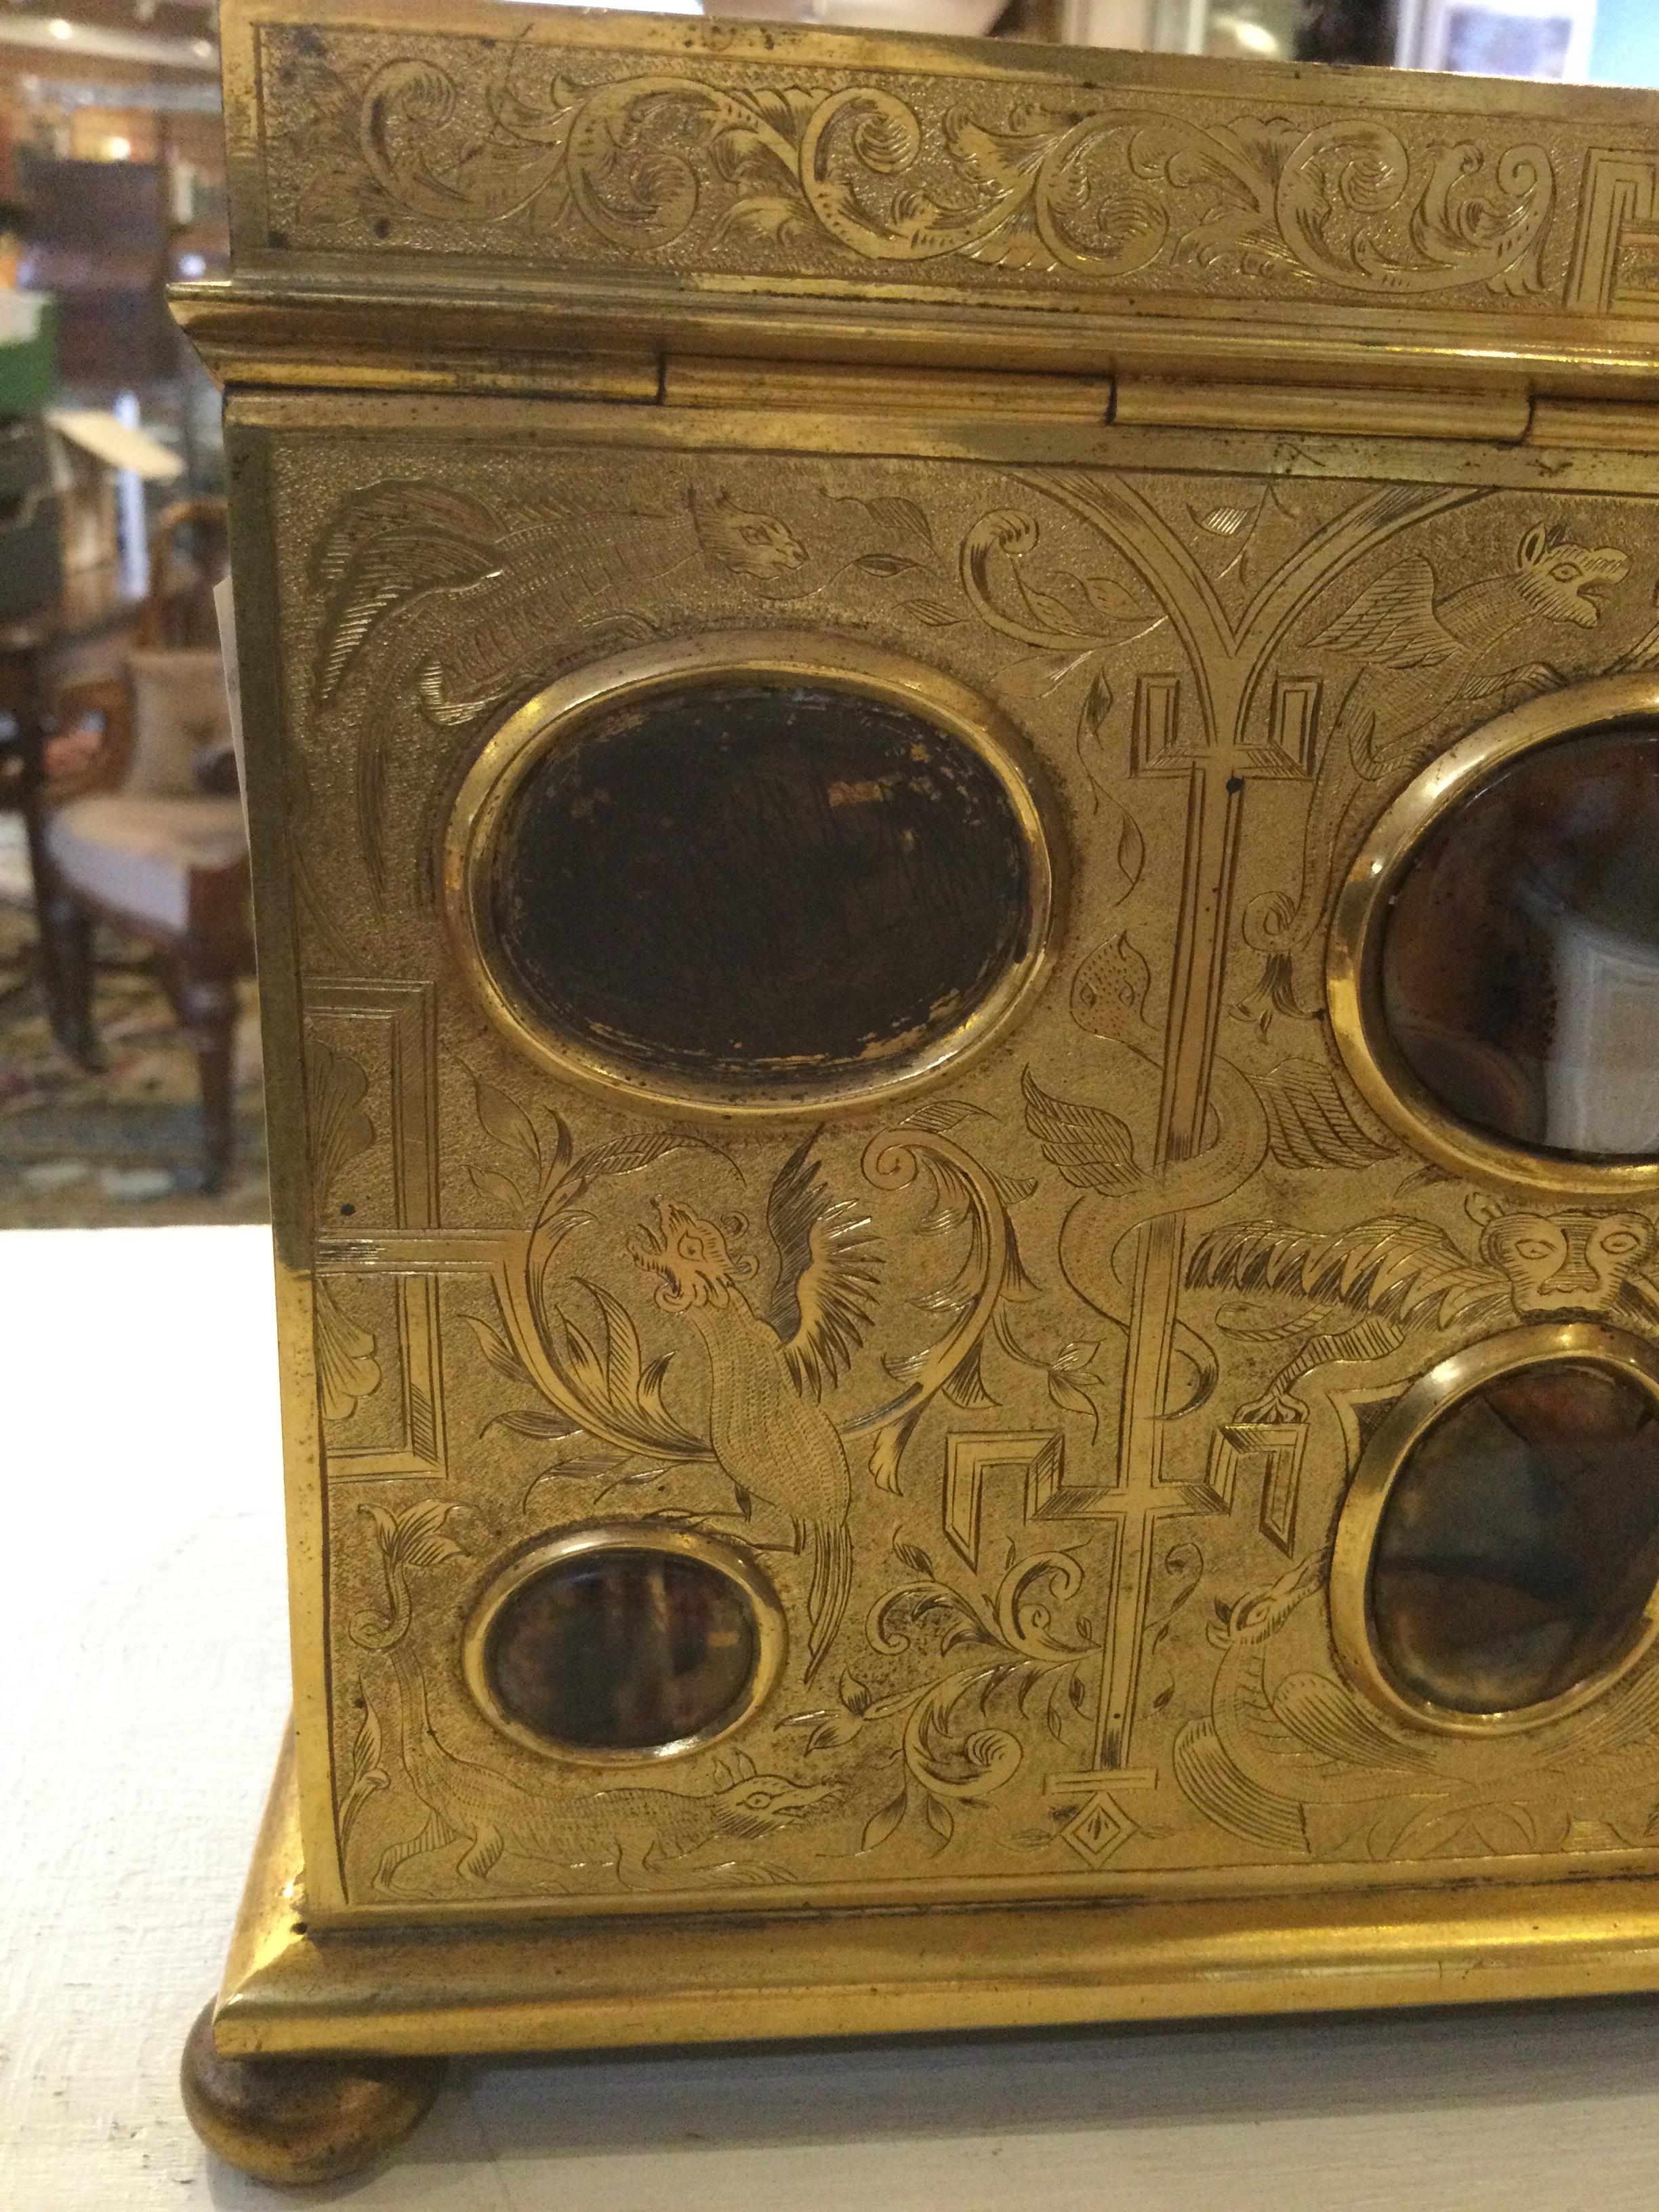 A 19th century correspondence gilt box with engraved decoration and inset cabochon stones hardstones - Image 25 of 25